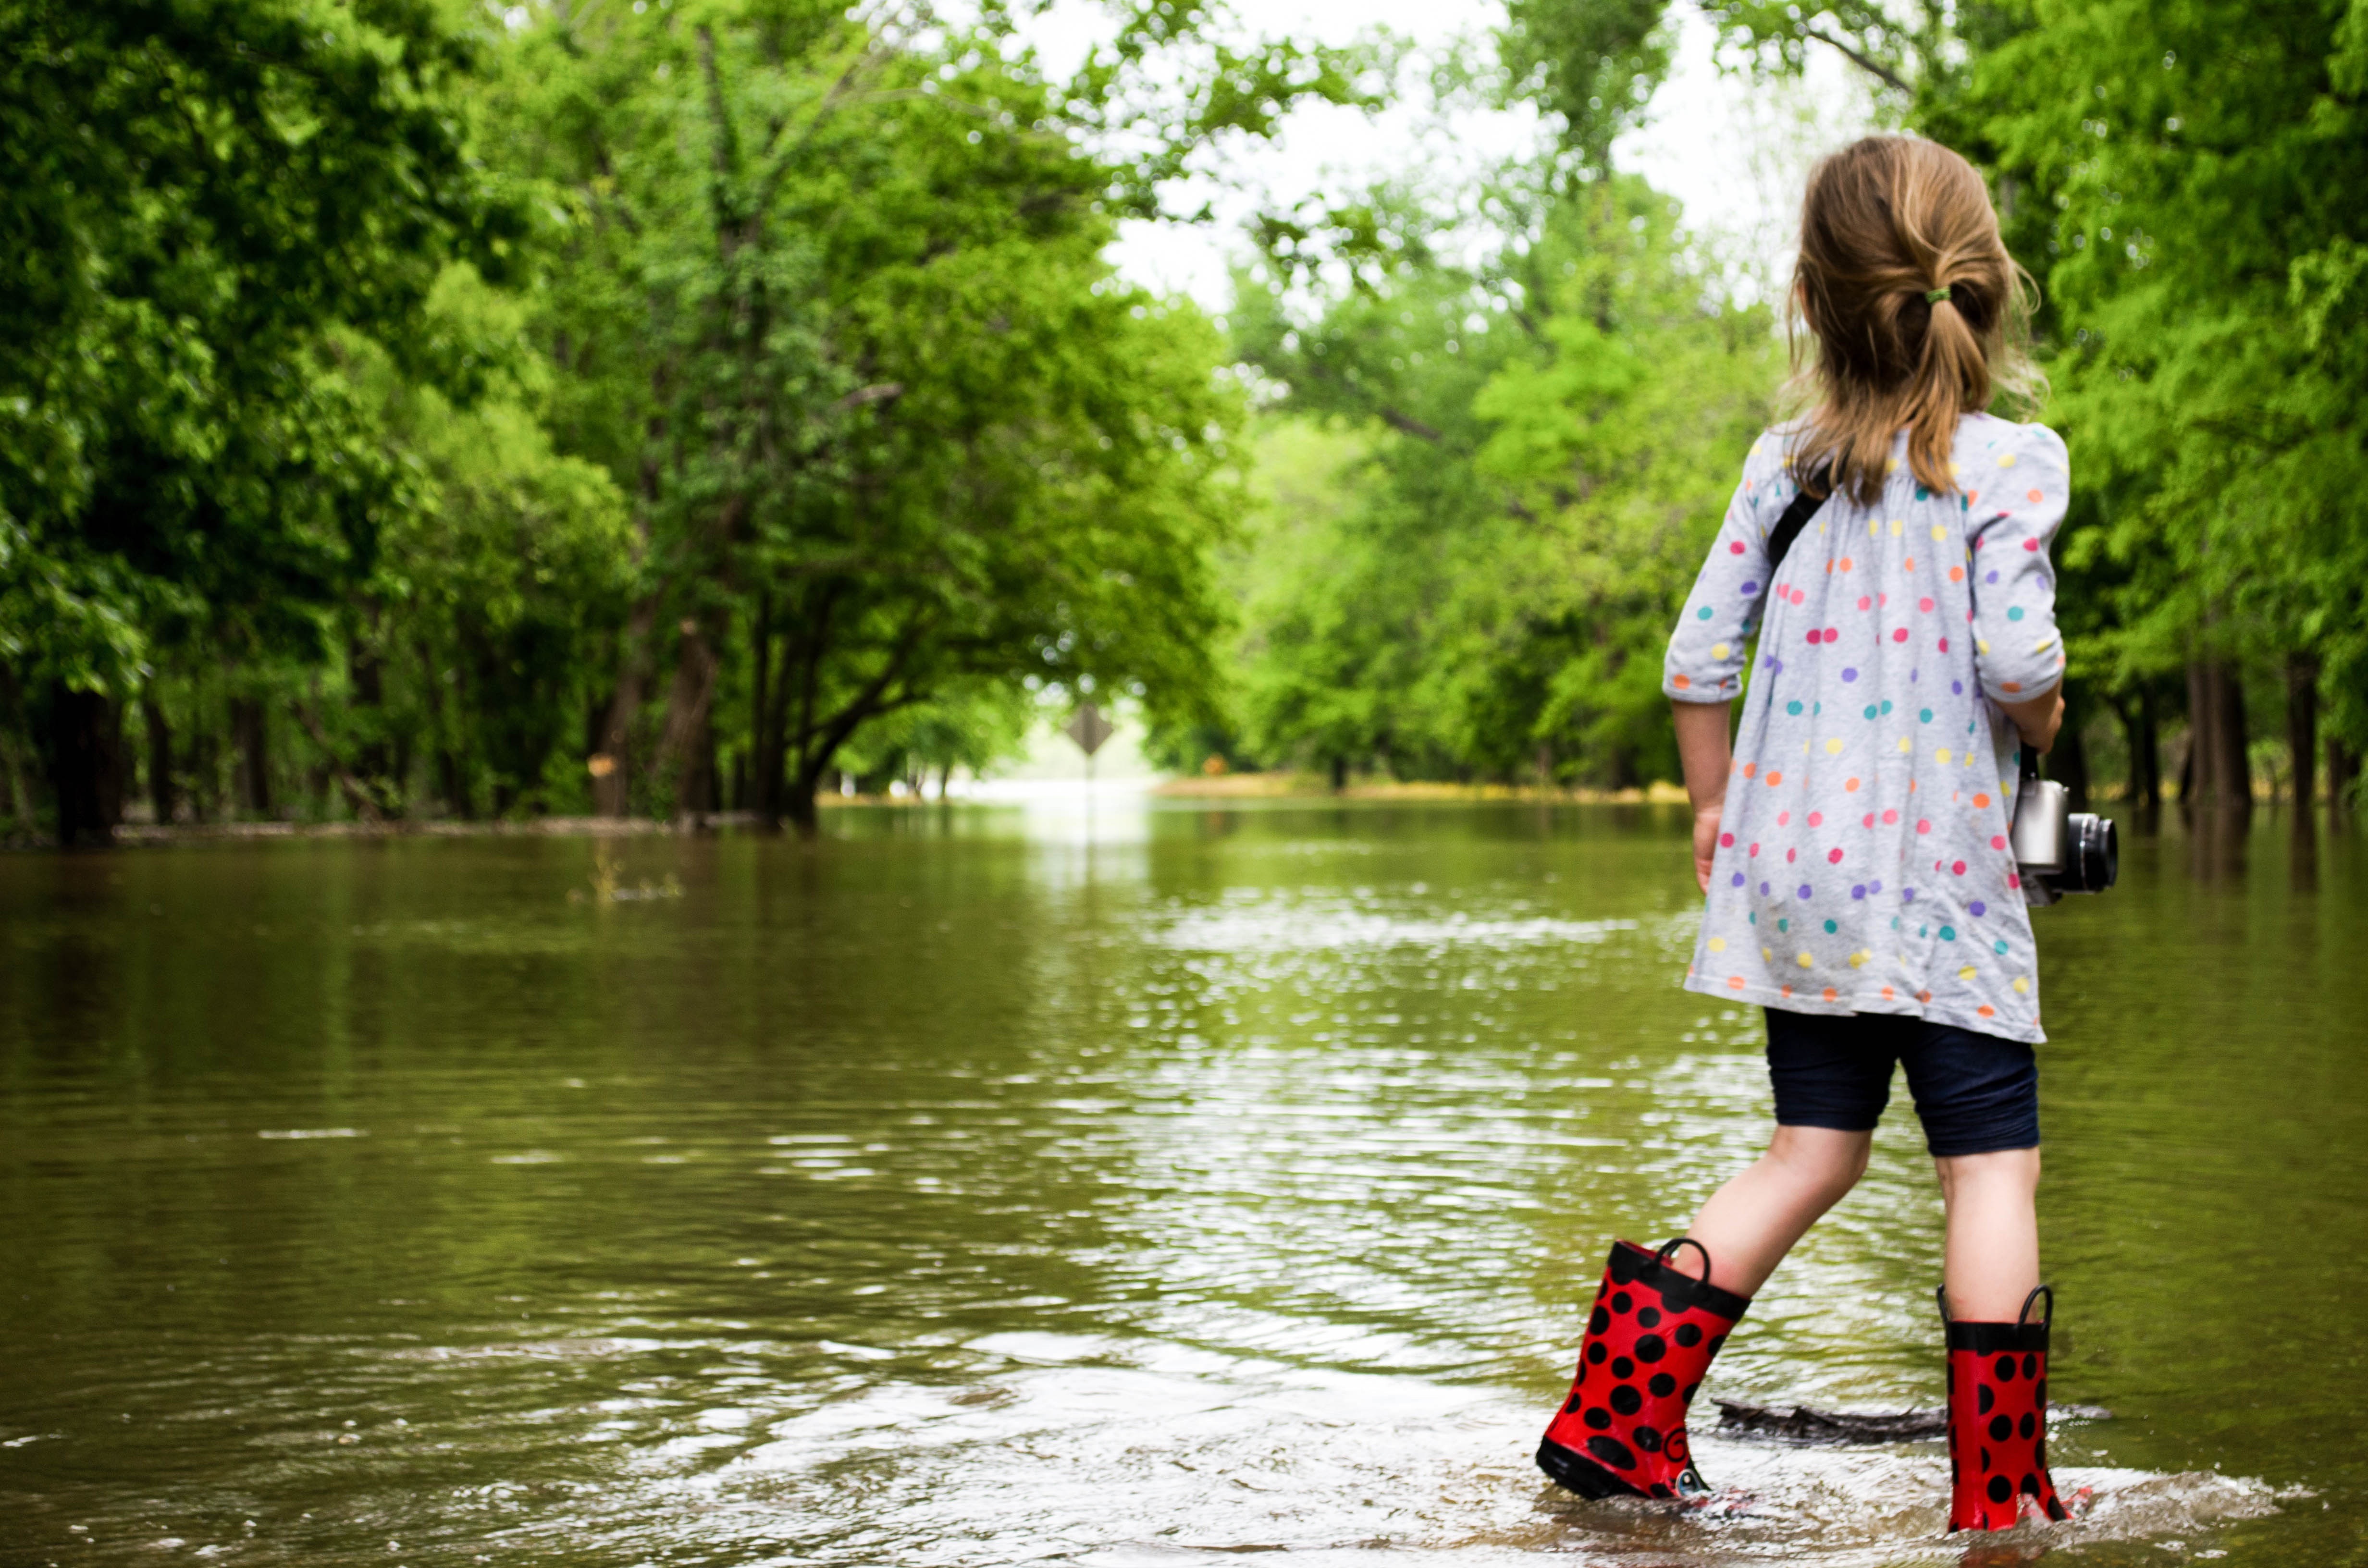 Young girl in rain boots wading a shallow river.